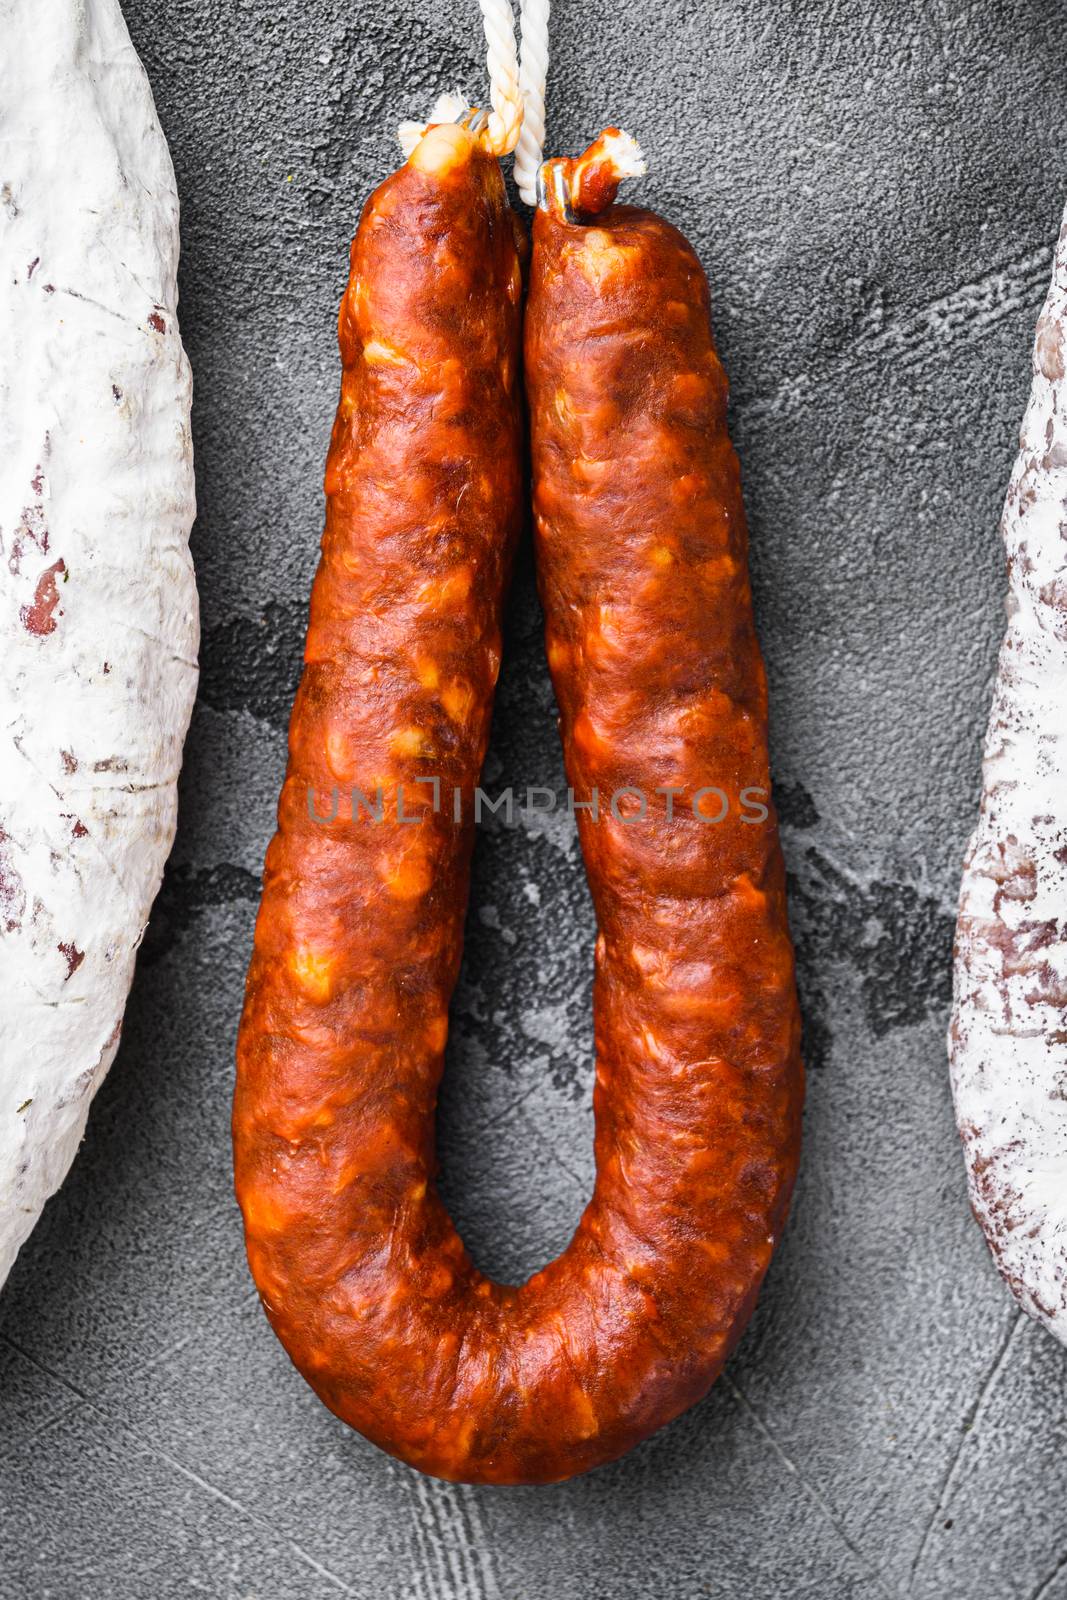 Spanish dry salami from a rack at market on grey textured background.